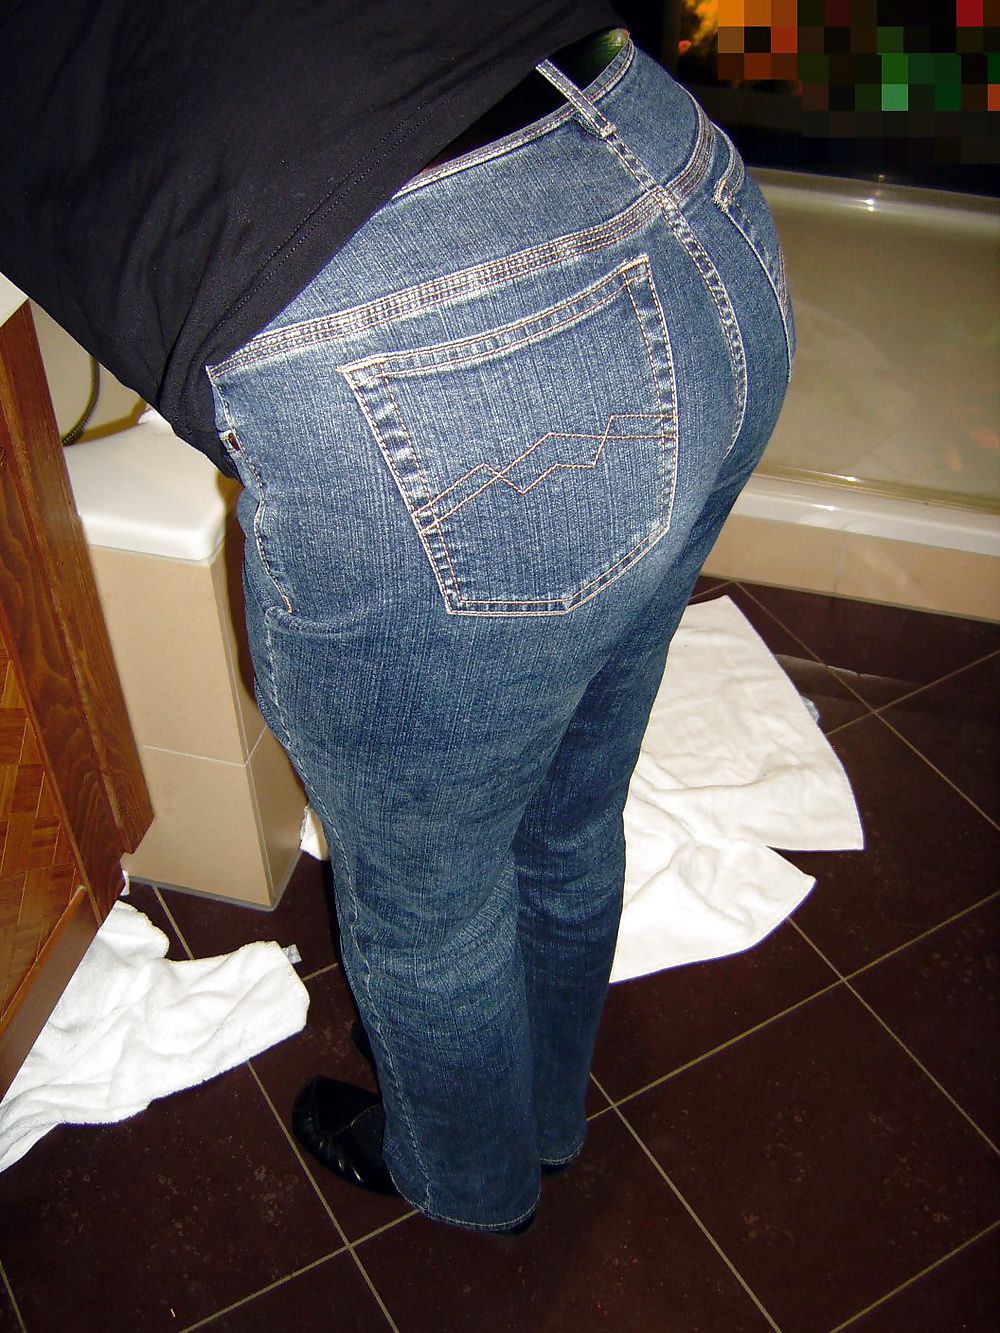 Big firm mature ass in jeans #22593416